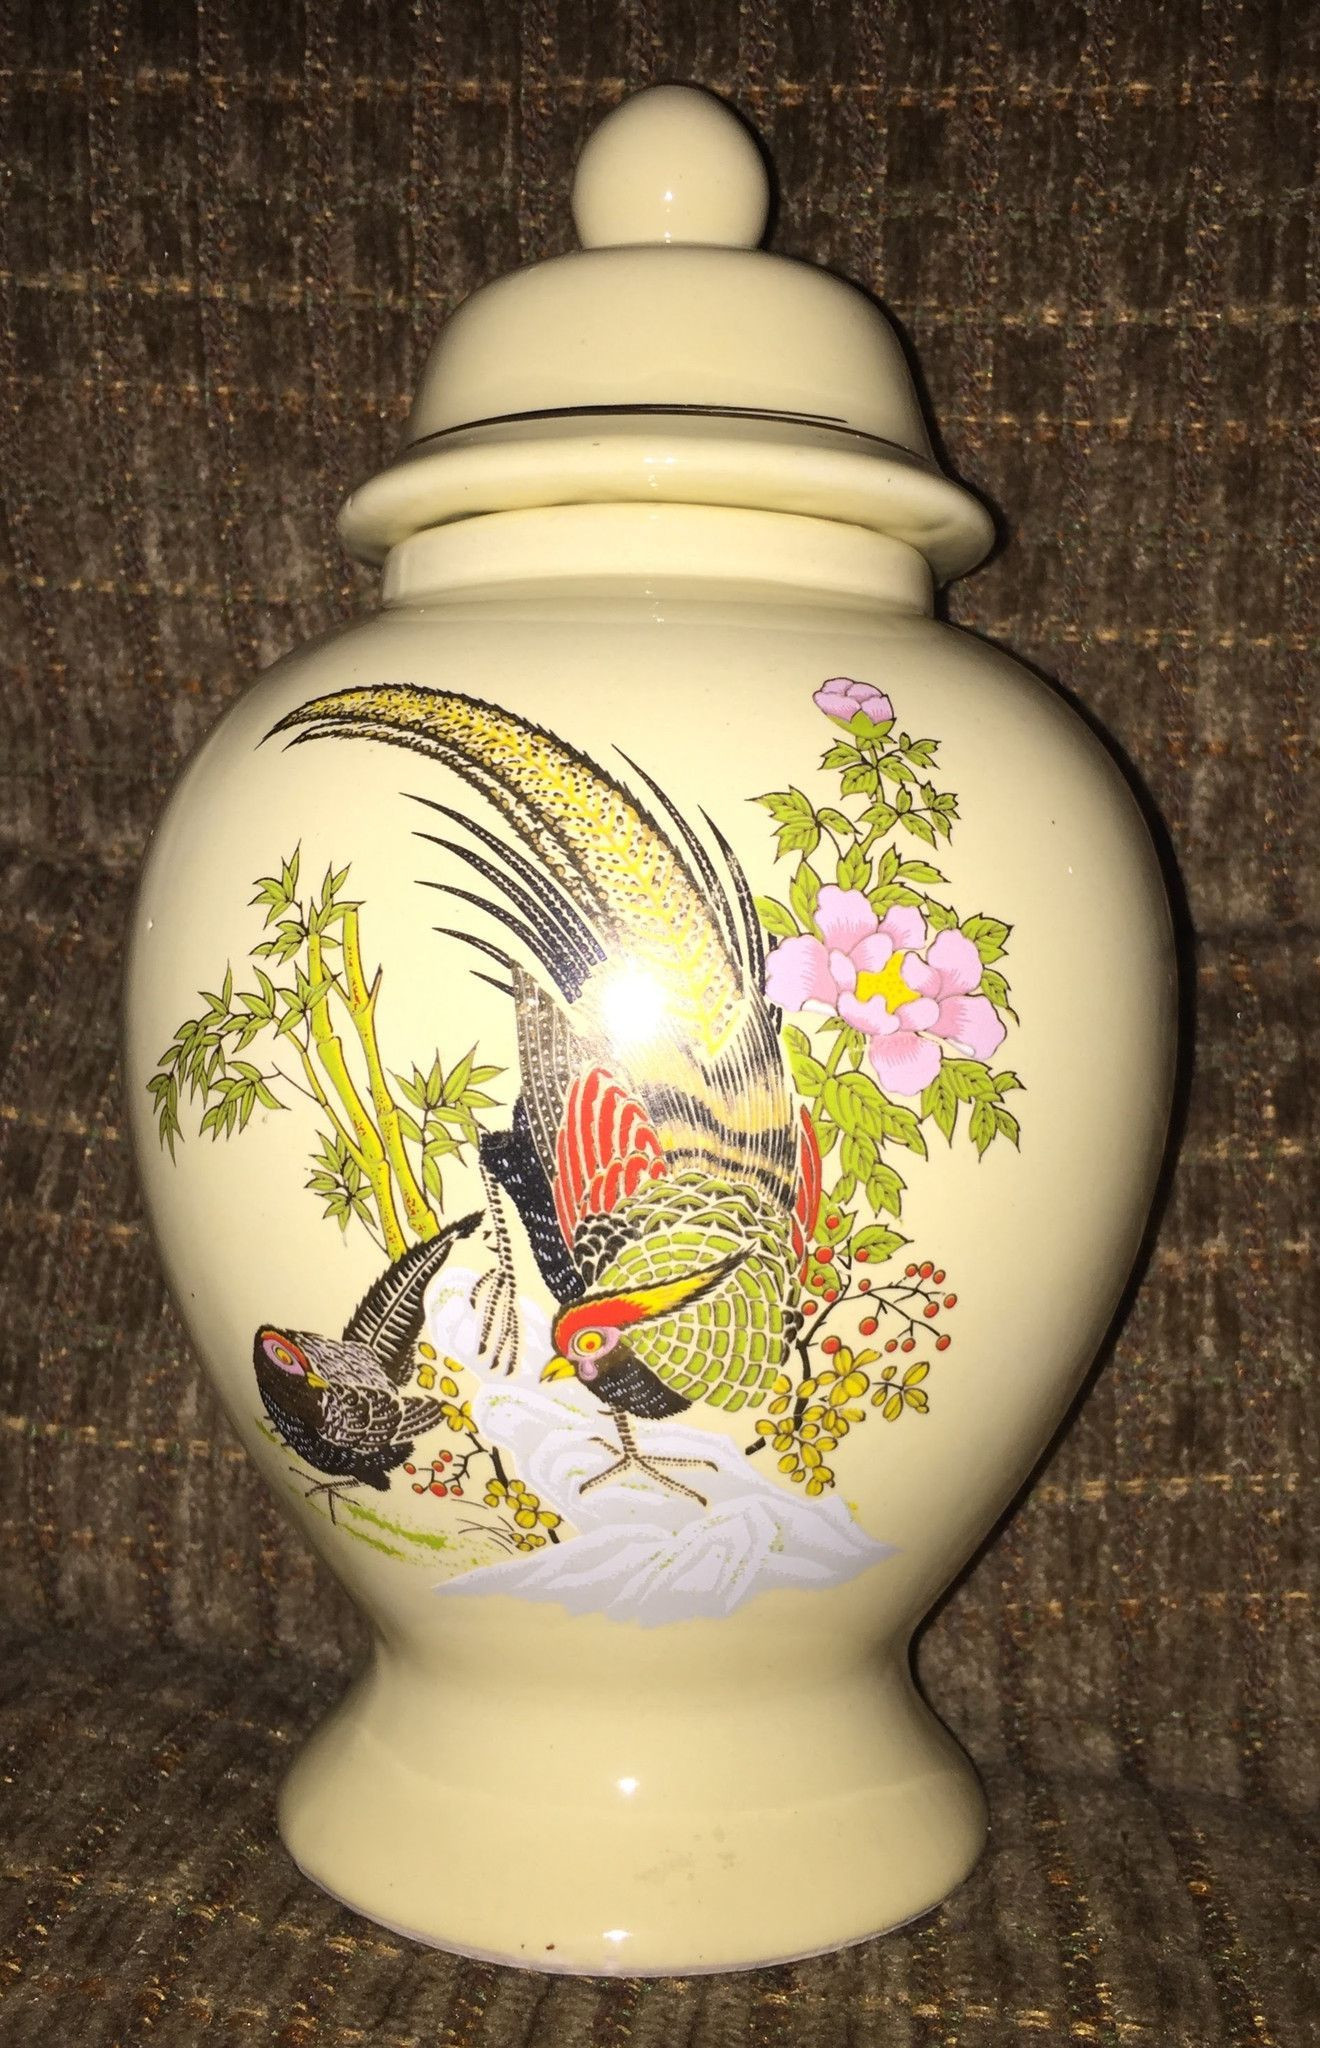 15 Wonderful asian Vase Stand 2024 free download asian vase stand of vintage asian vase jar hand painted pinterest asian vases and in vintage collectible asian vase jar hand painted two birds bamboo and flowers